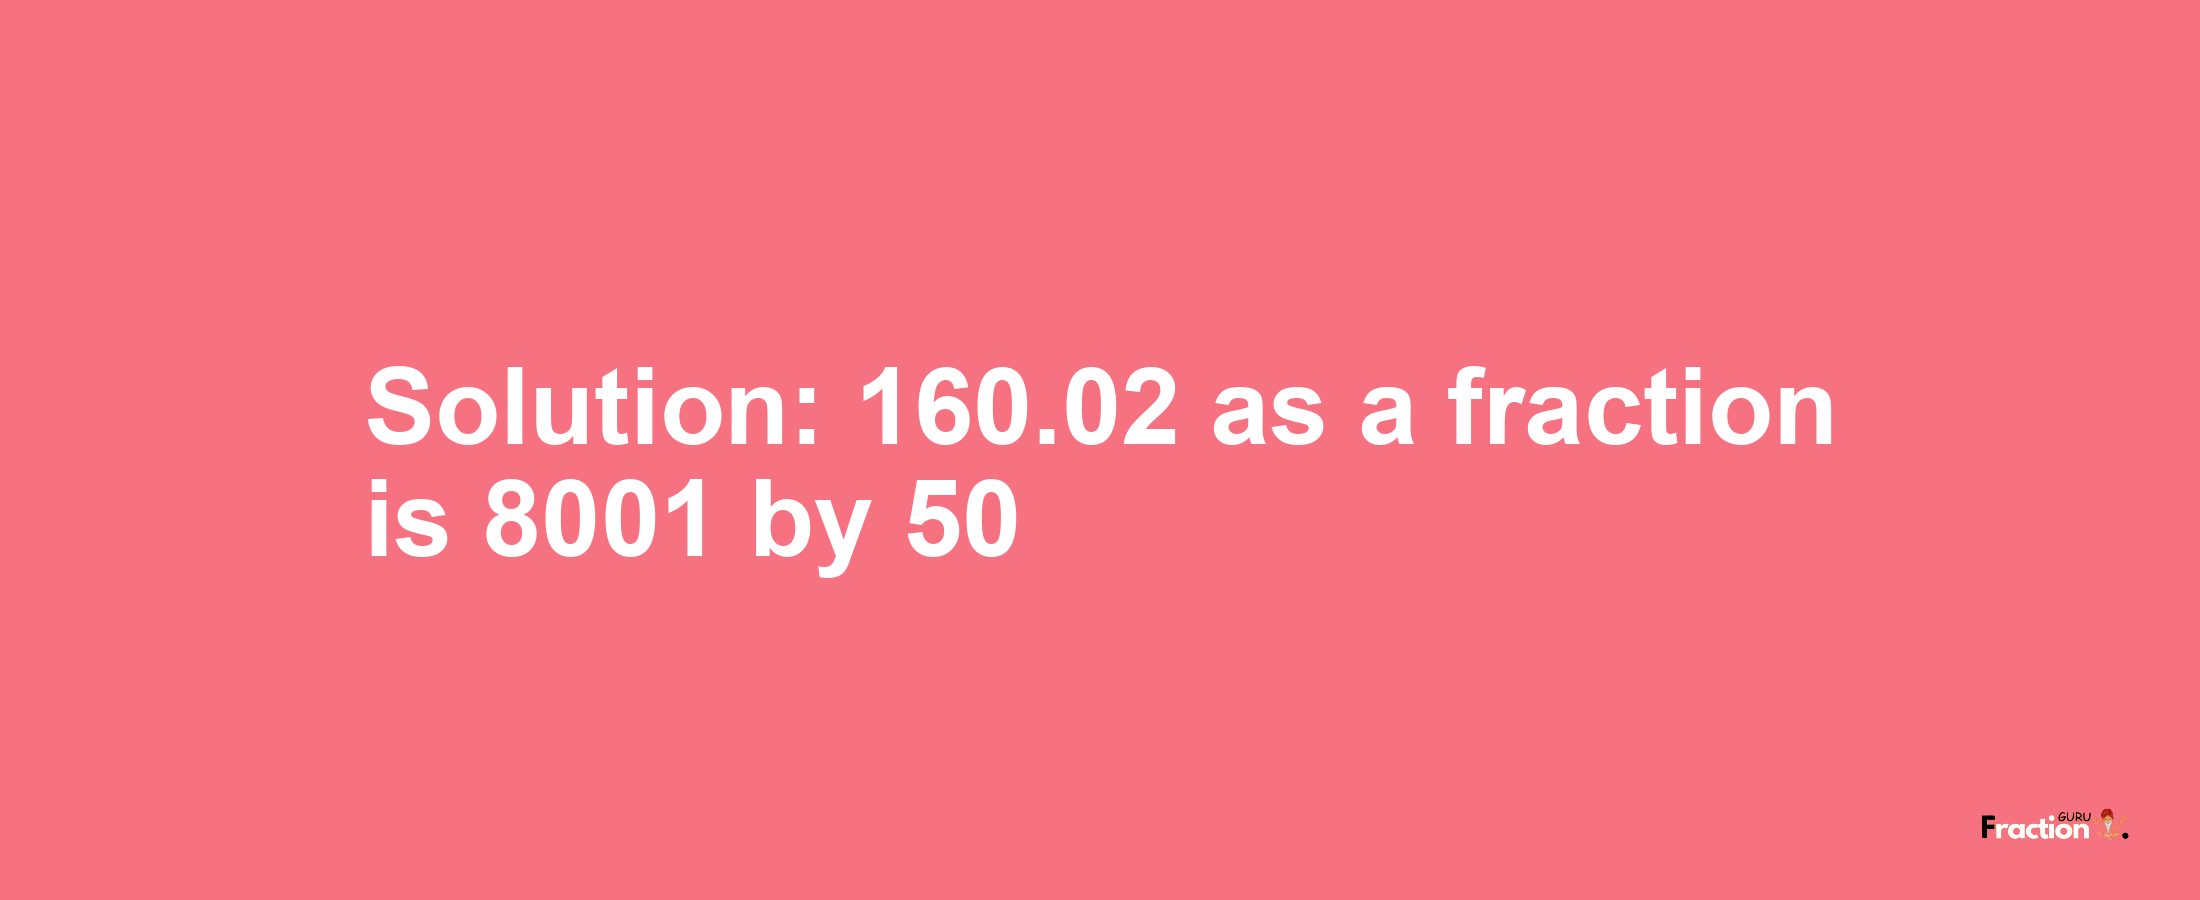 Solution:160.02 as a fraction is 8001/50